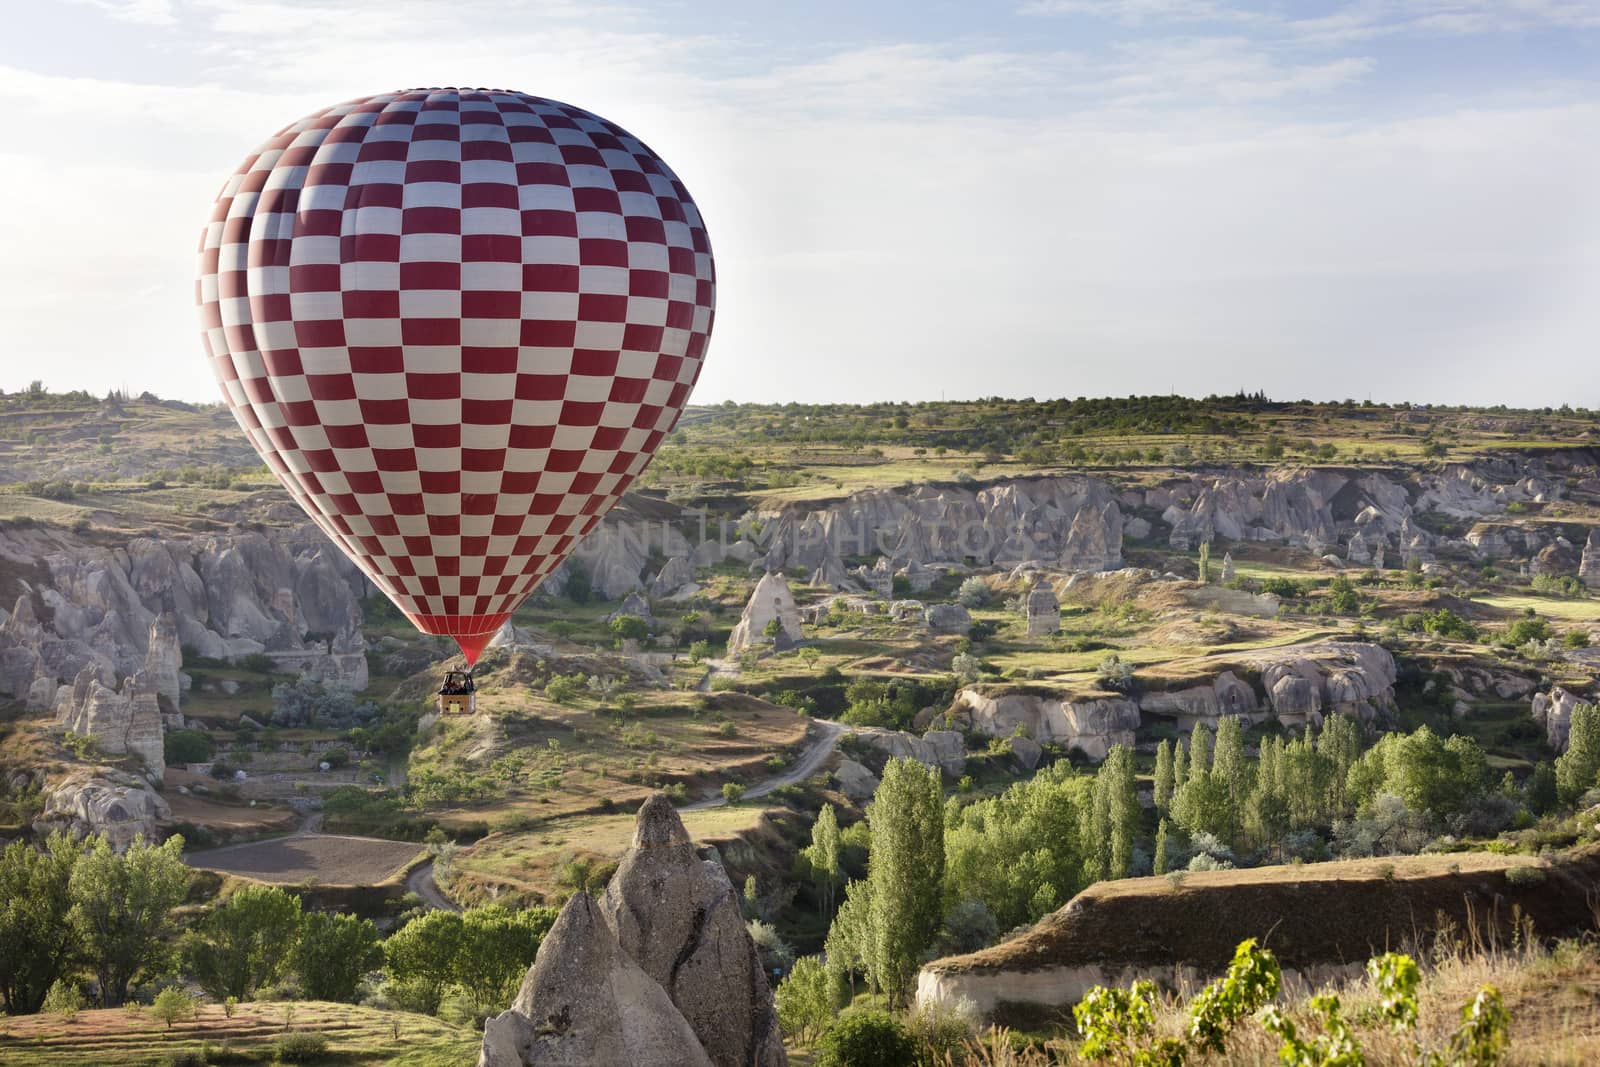 A view of a red balloon flying over the Valley of the Doves at dawn. Cappadocia, Turkey.